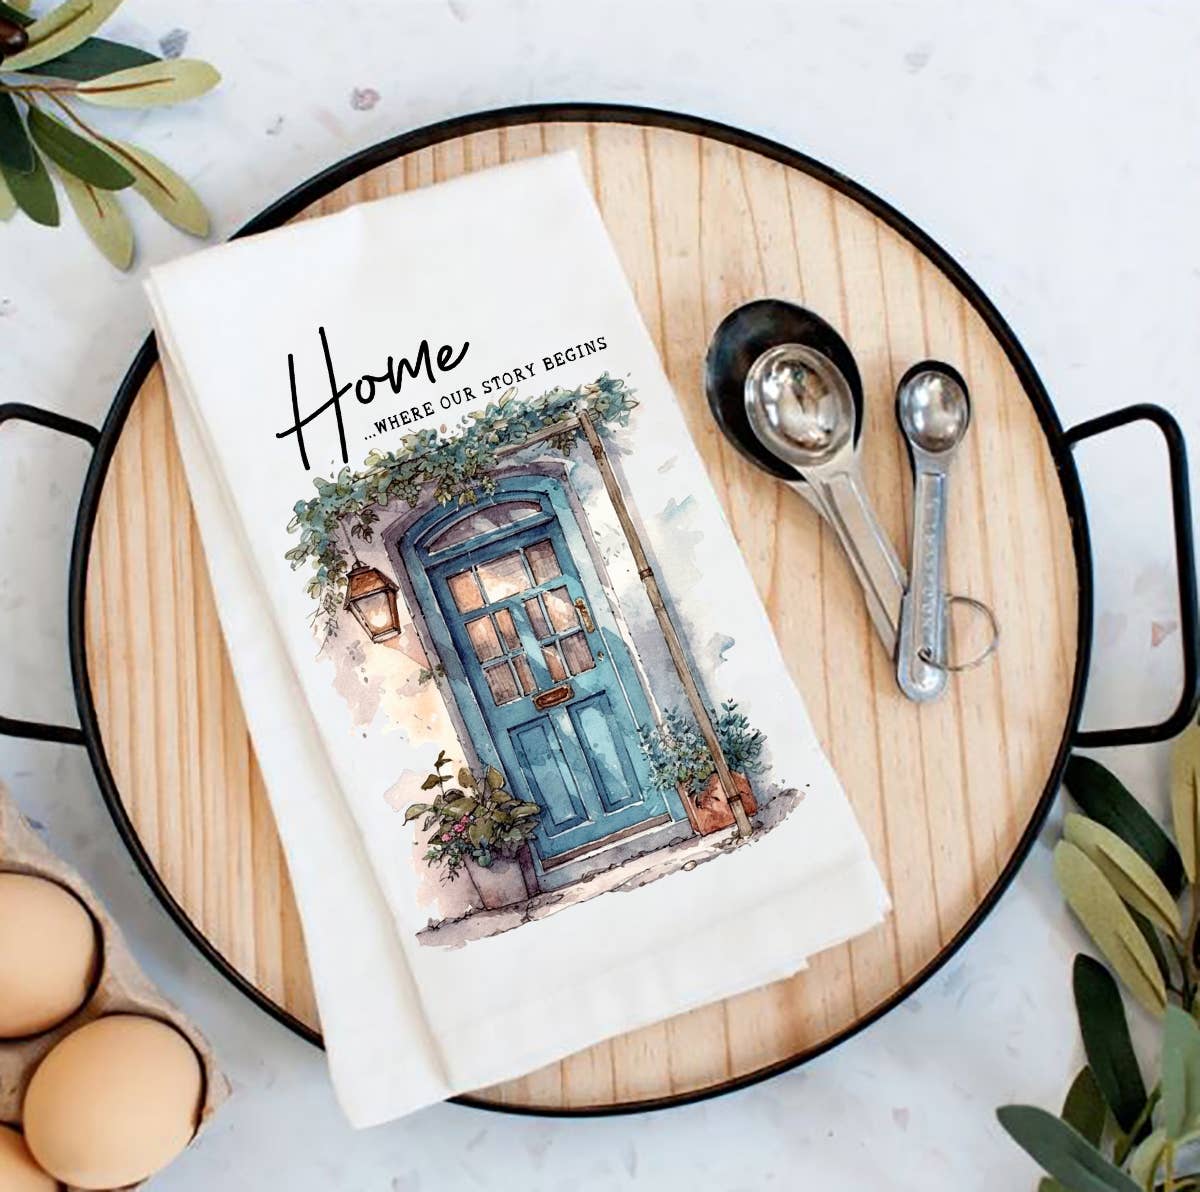 Avery Lane Gifts - Blue Door Home Our Story Begins Flour Sack Tea Towel